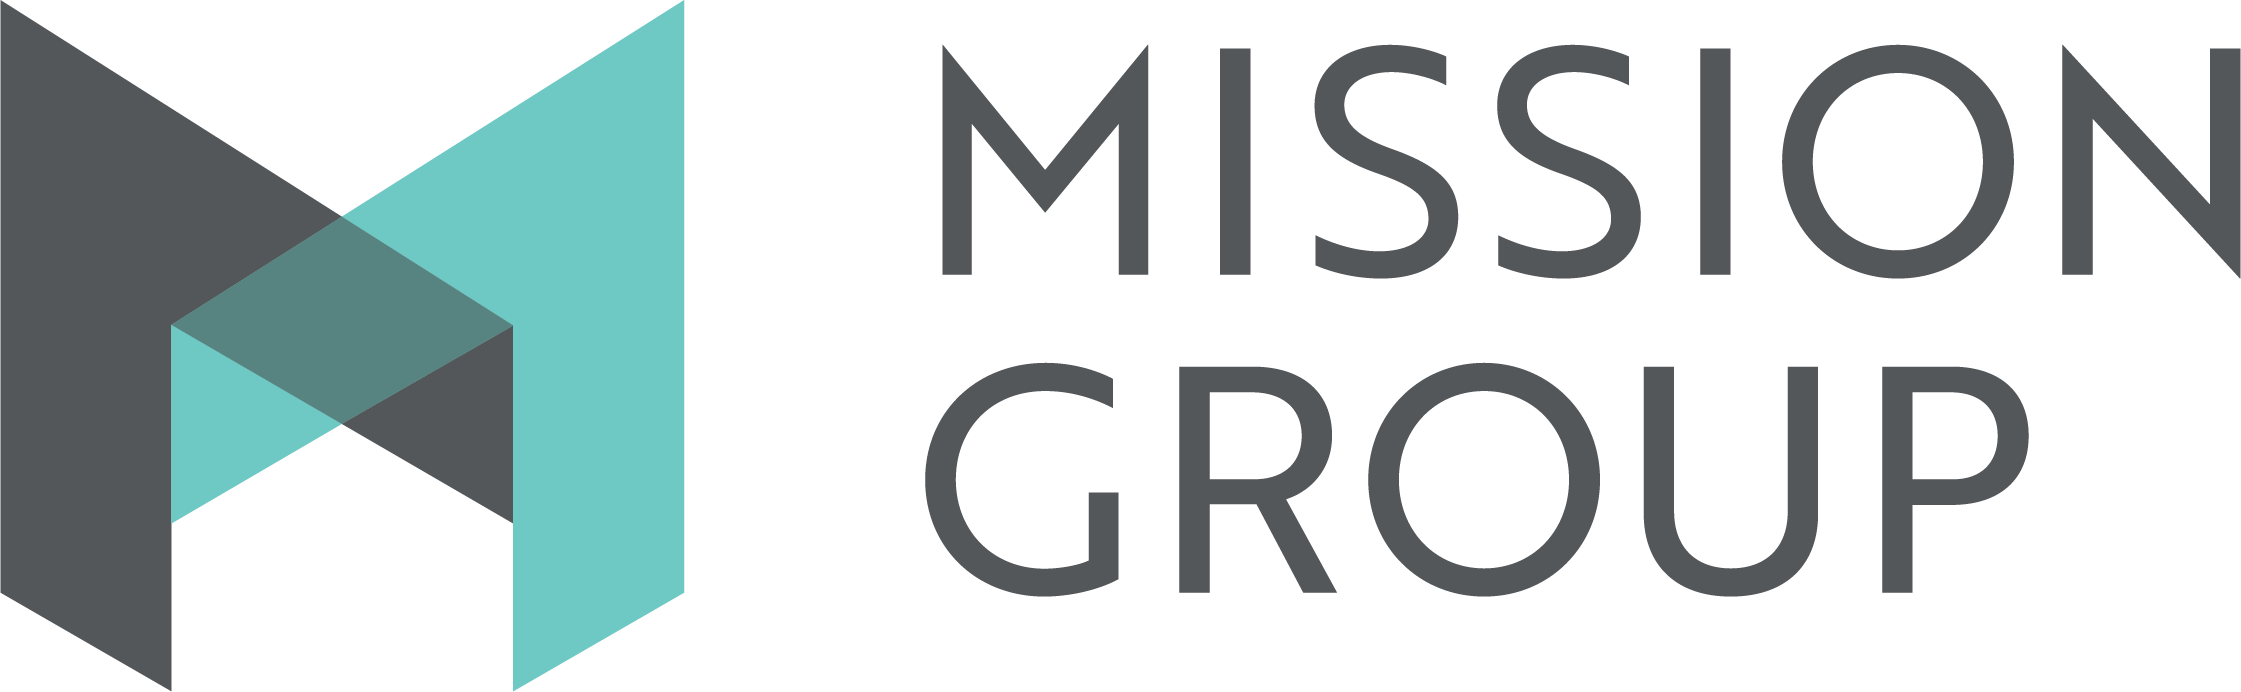 Mission Group